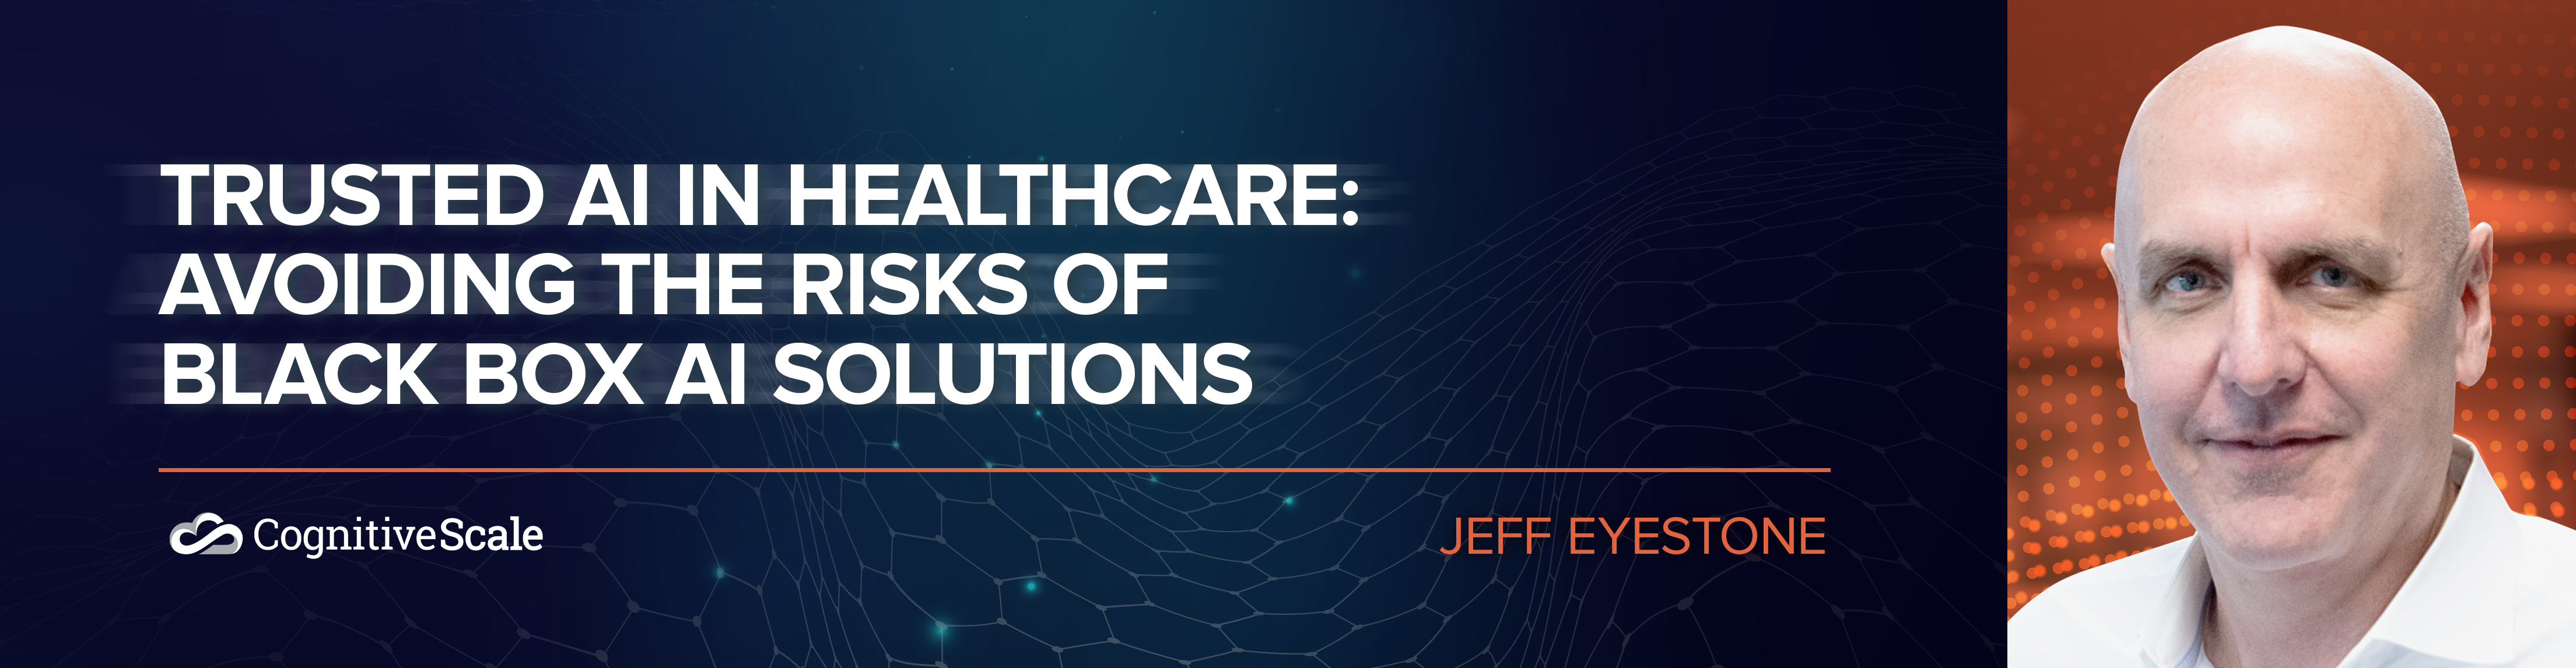 Trusted AI in Healthcare: Avoiding the Risks of Black Box AI Solutions